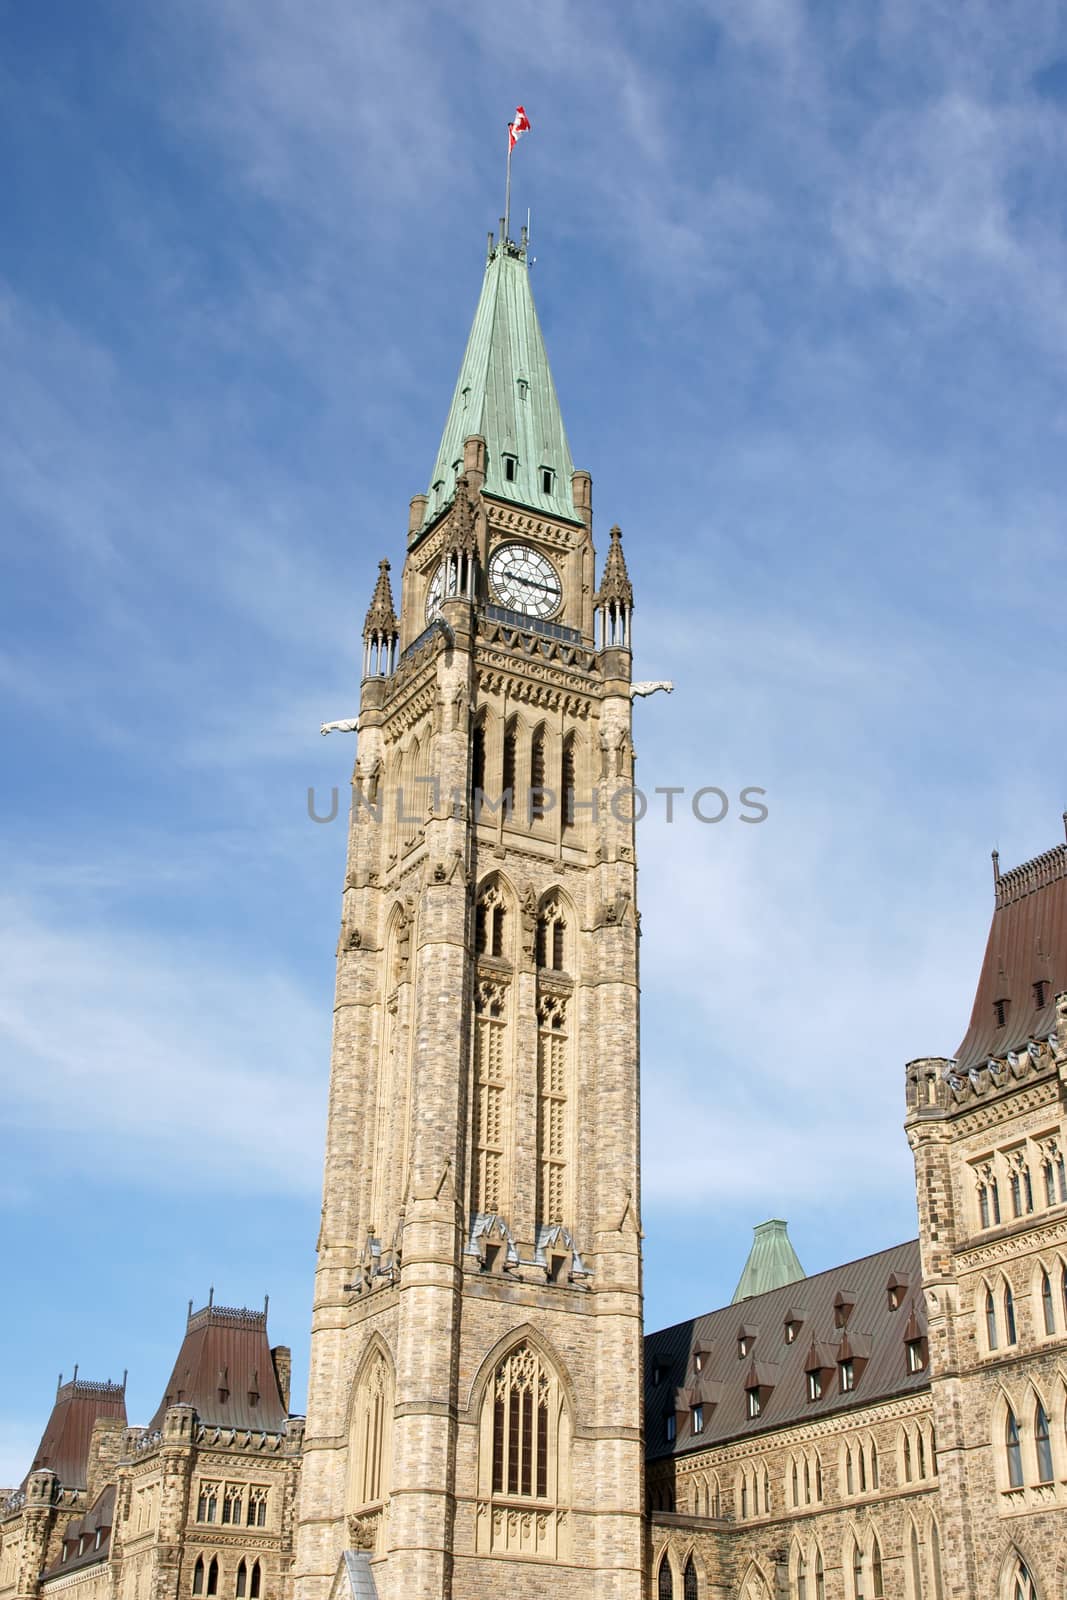 The clock tower of Parliament of Canada in Ottawa